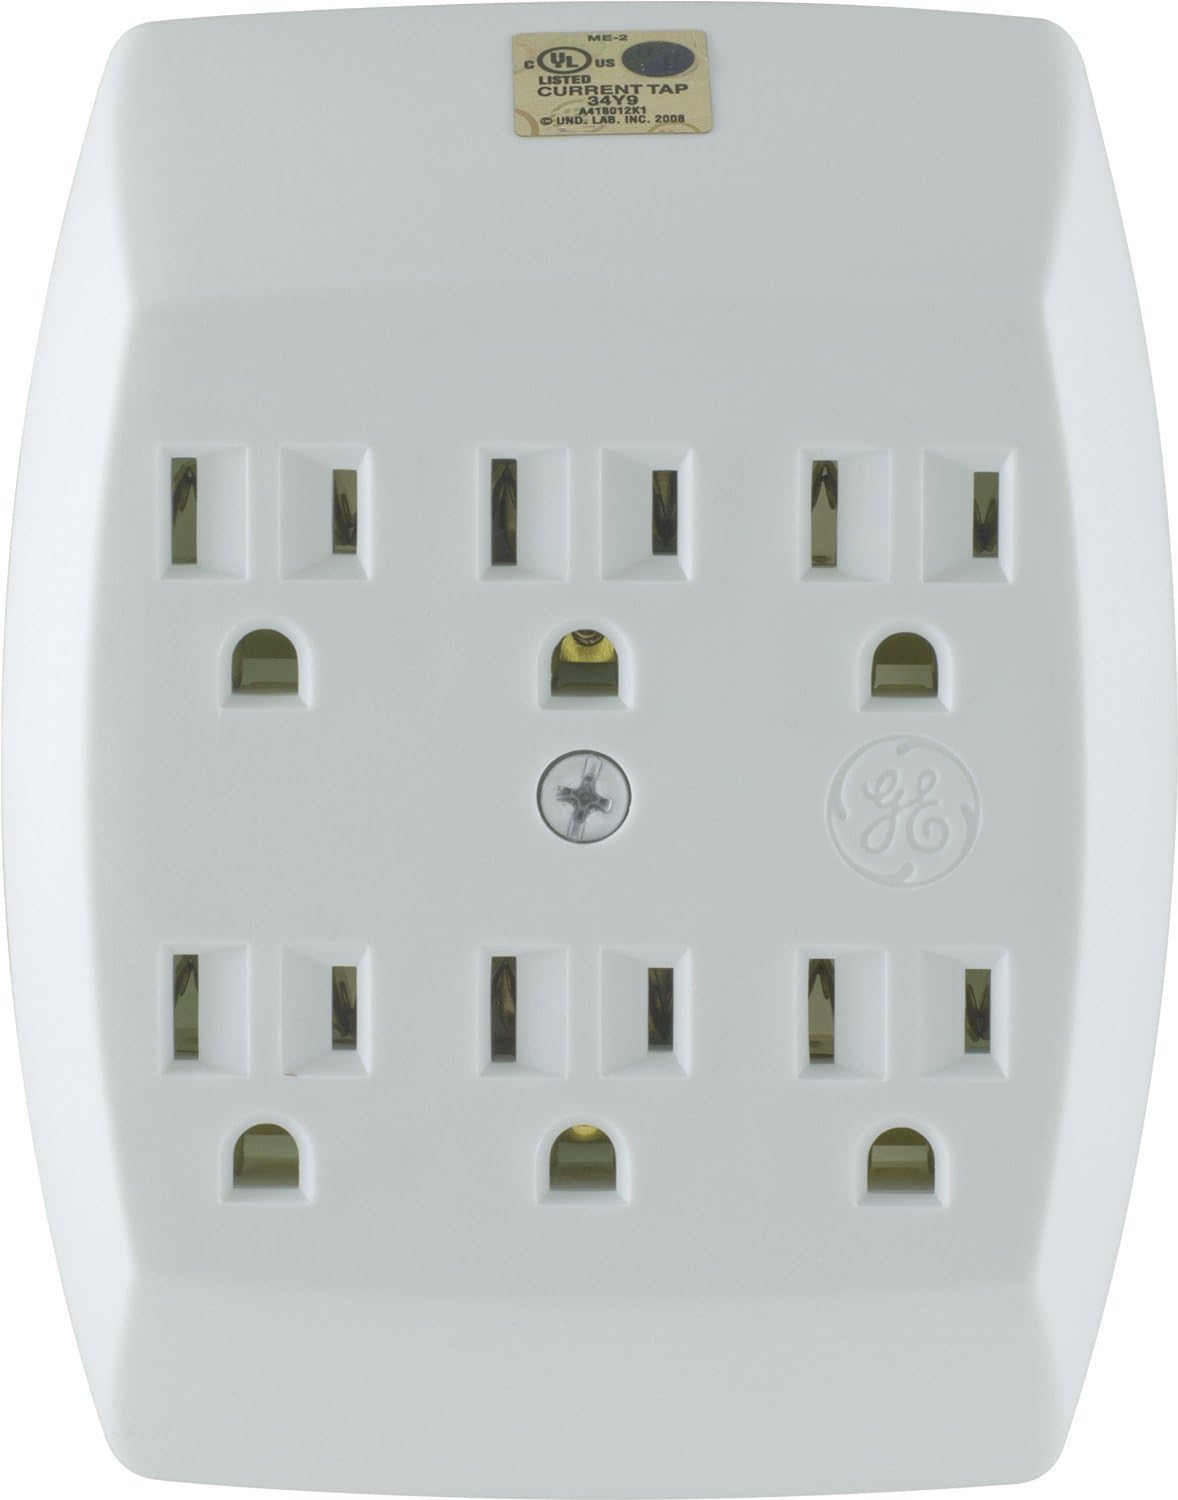 GE 6 Outlet Extender Wall Tap, Grounded Adapter, Charging Station, 3-Prong, Secure Install, Cruise Essentials, ETL Listed, White, 54947